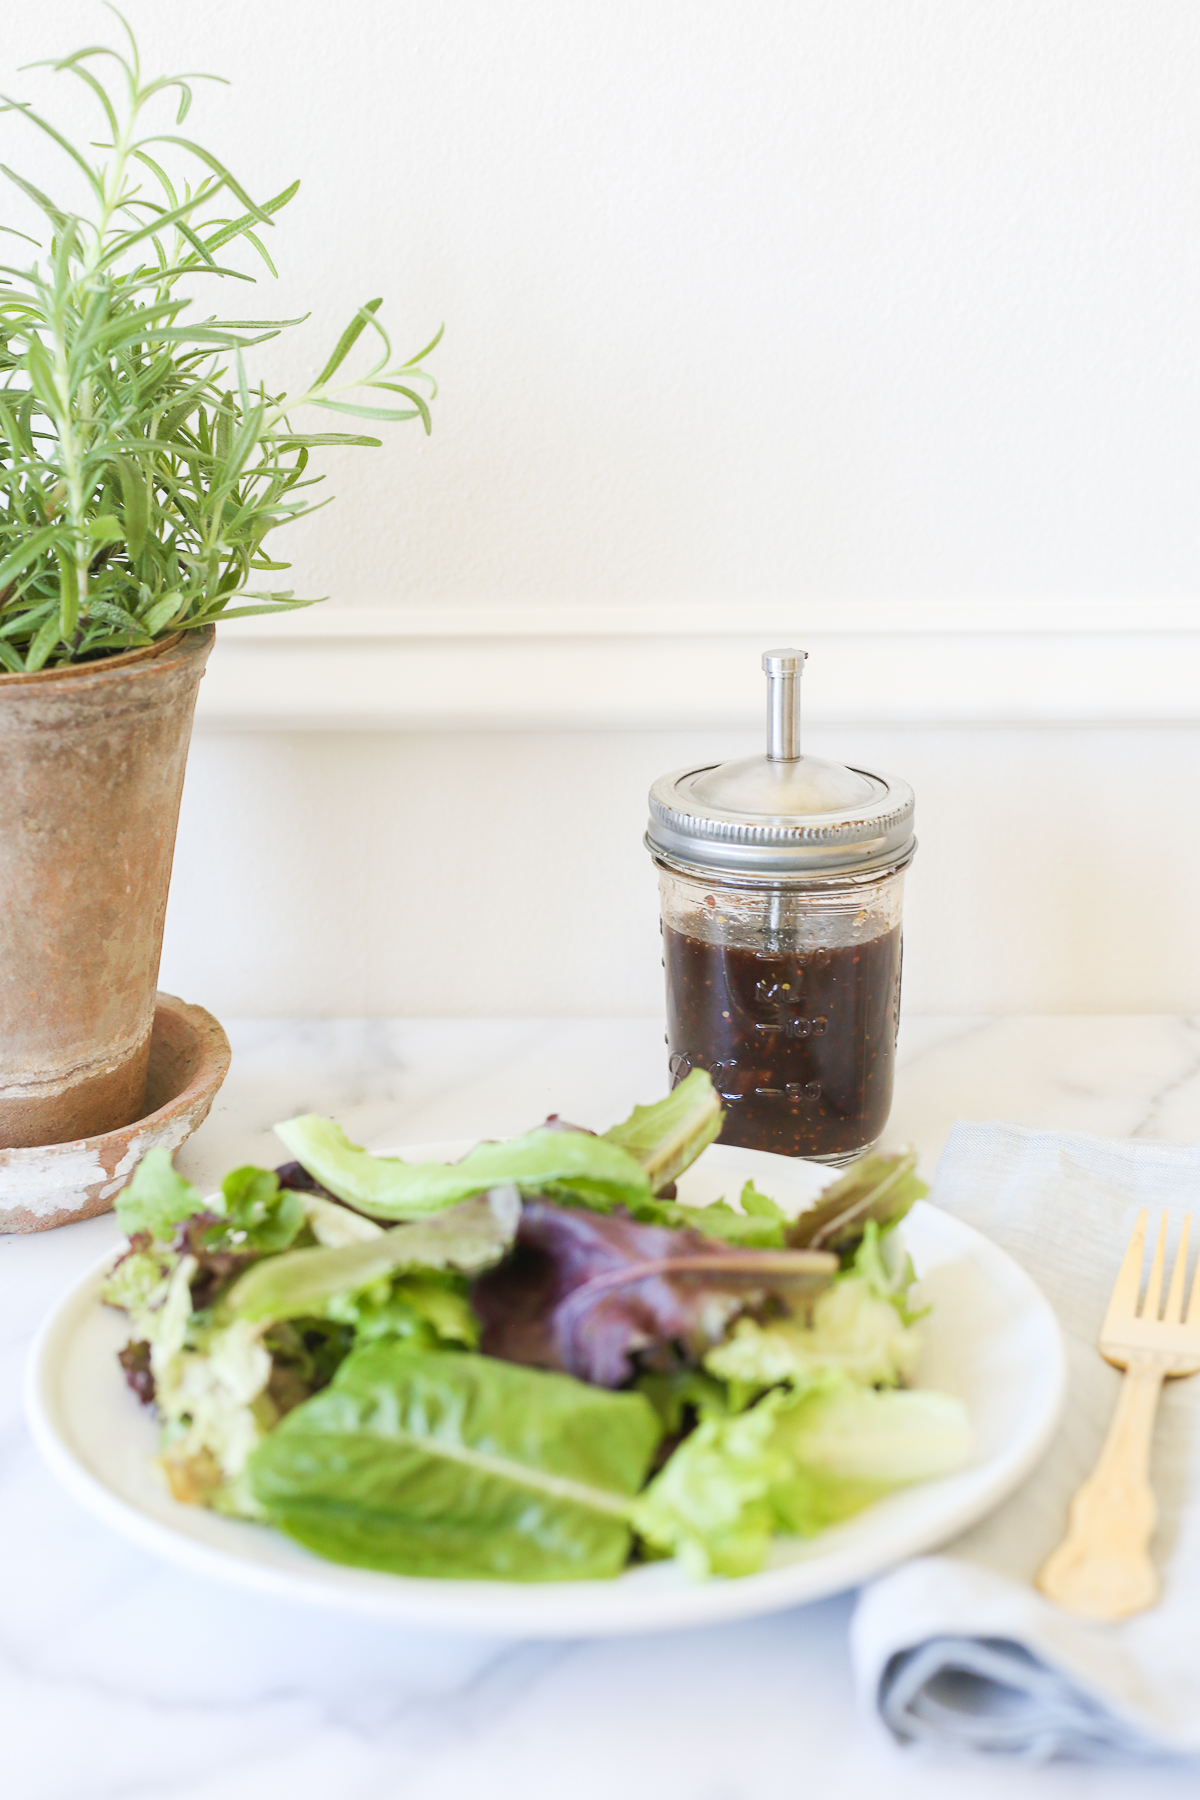 Balsamic vinaigrette in a glass bottle, next to a plate of salad.